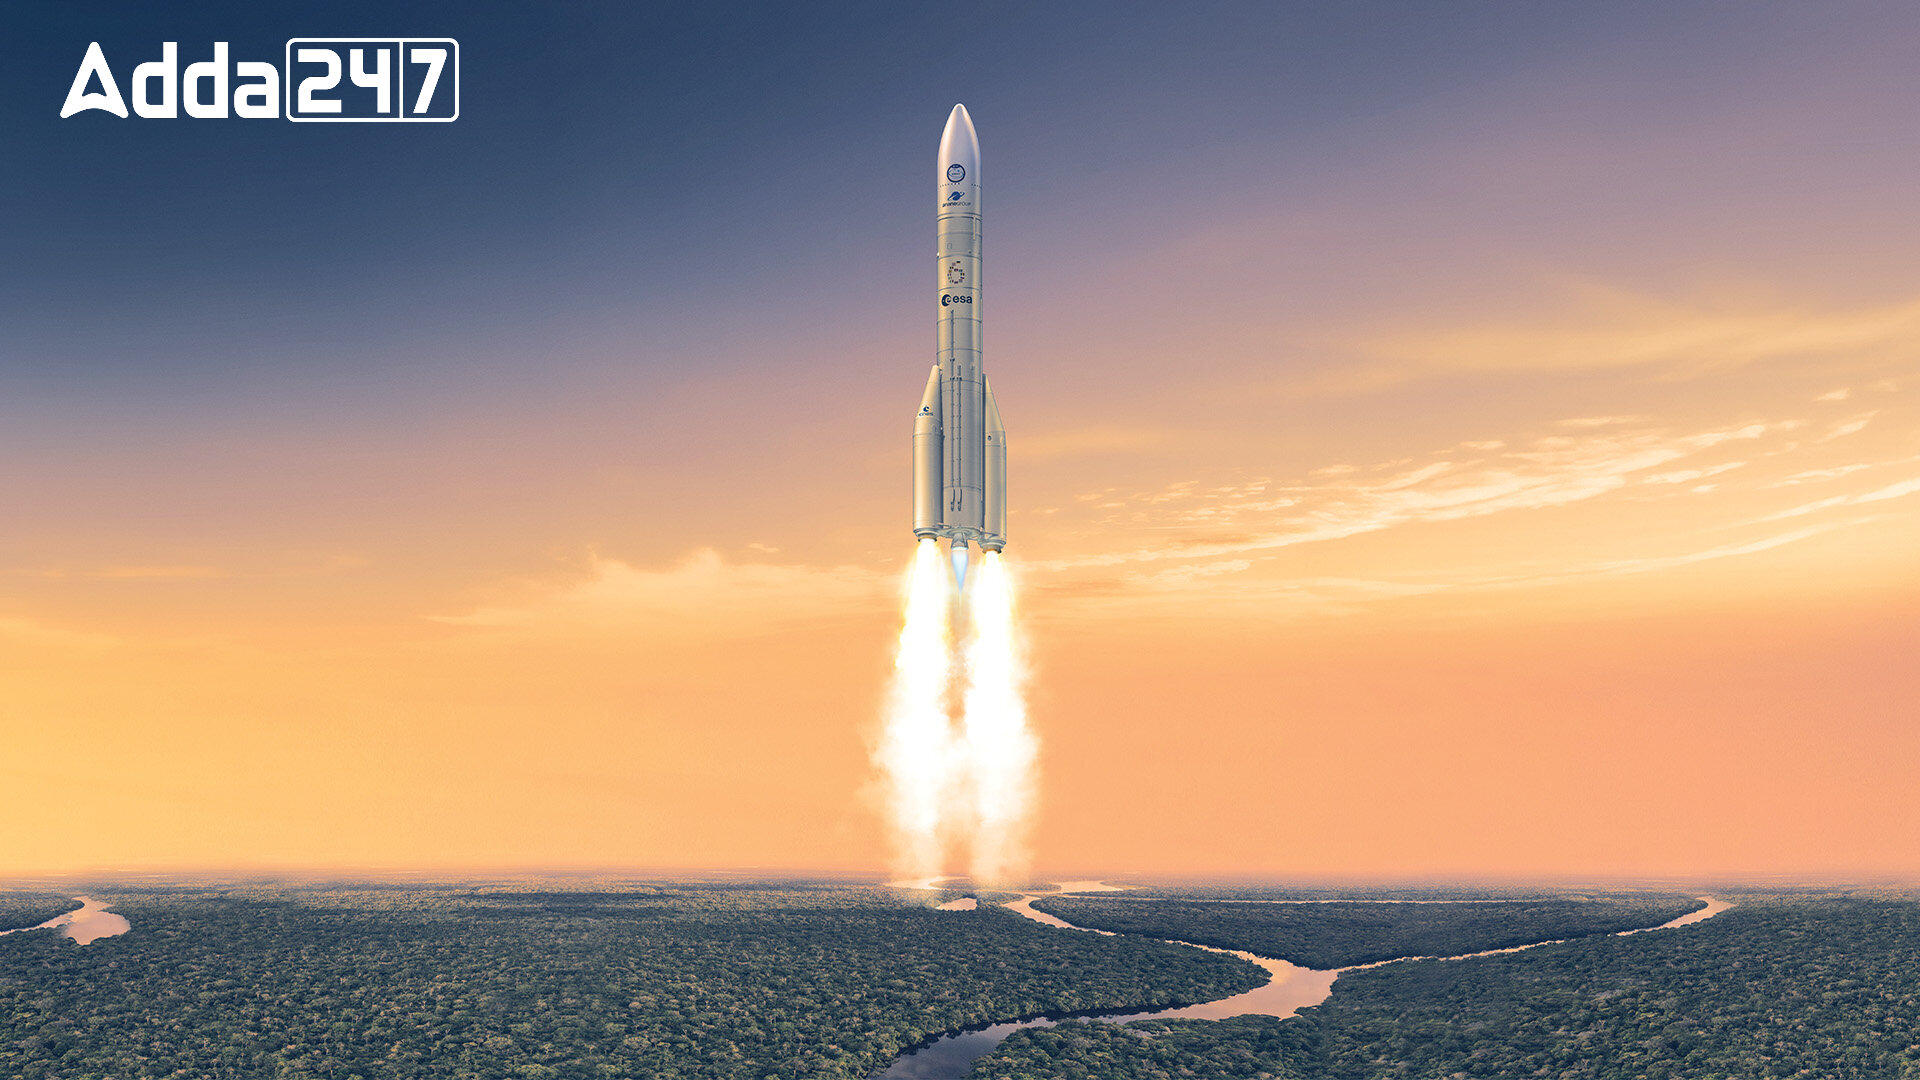 Europe's Ariane 6 Rocket Launched After 4-Year Delay